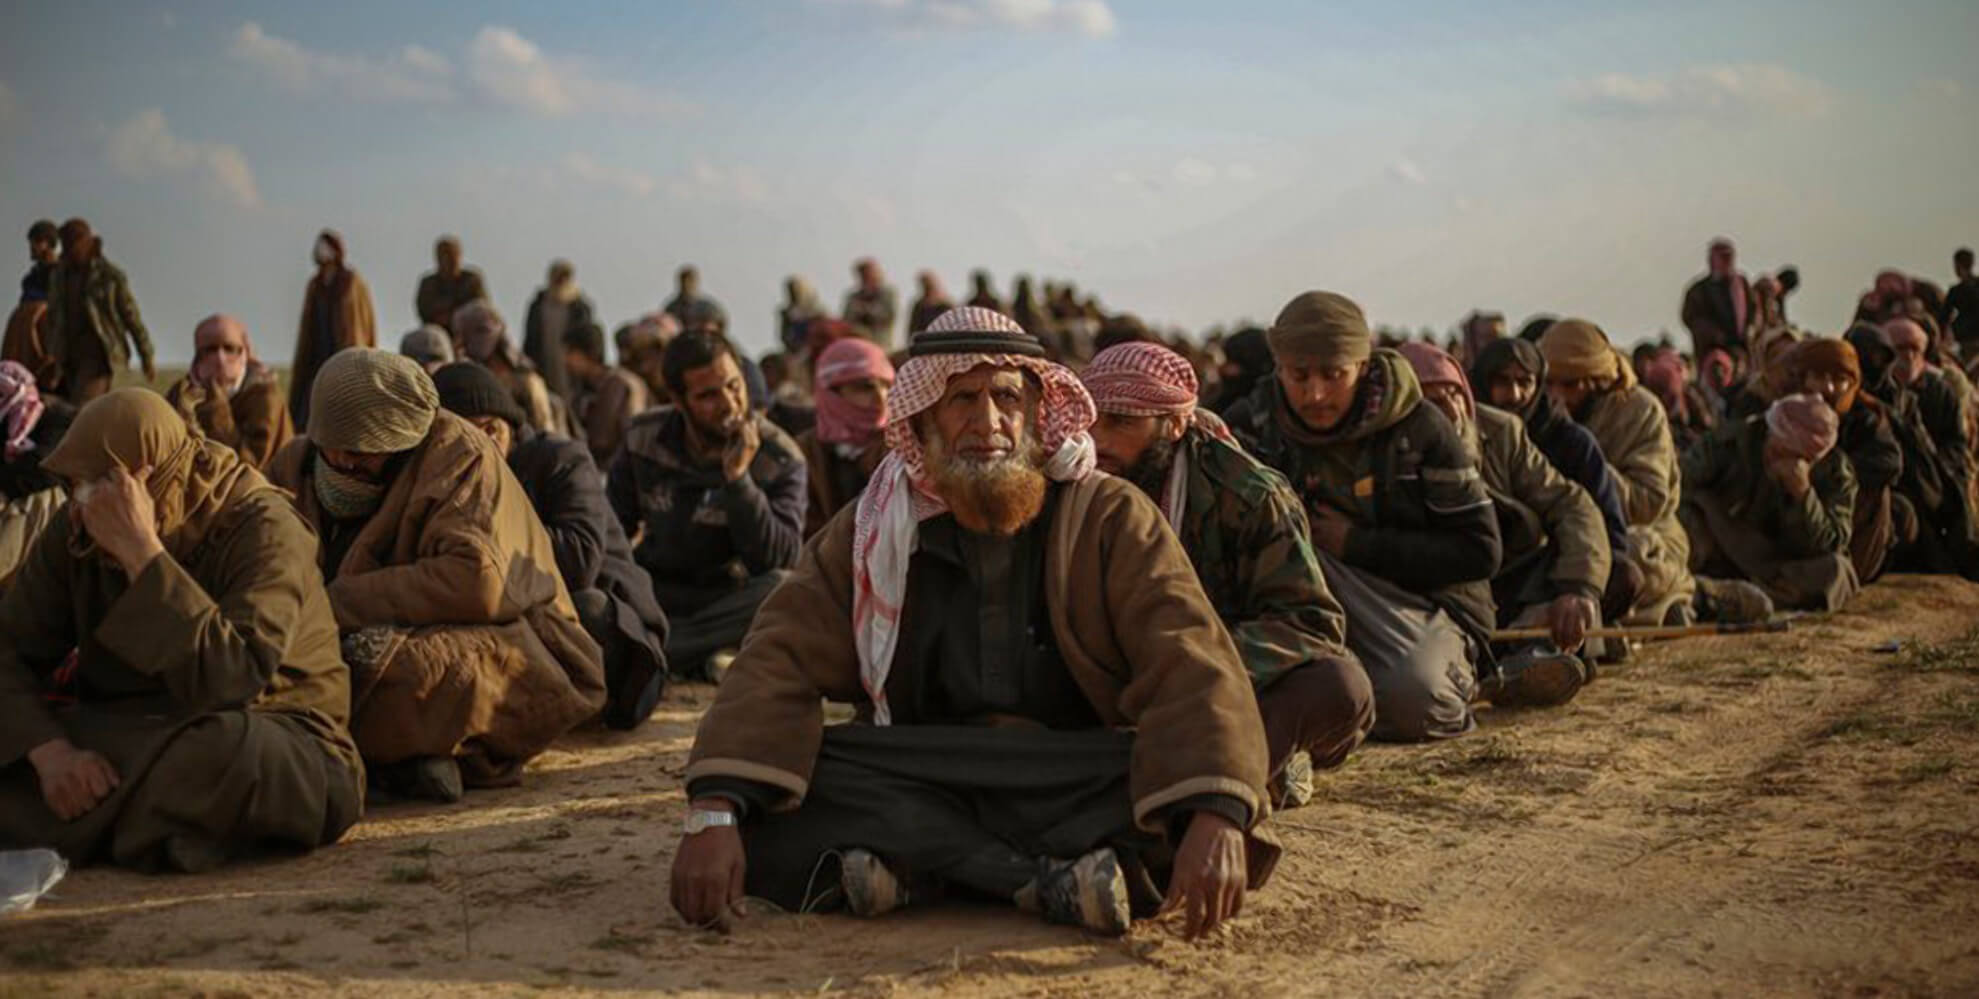 The internment camp in Syria’s north-east is still packed with ISIS families